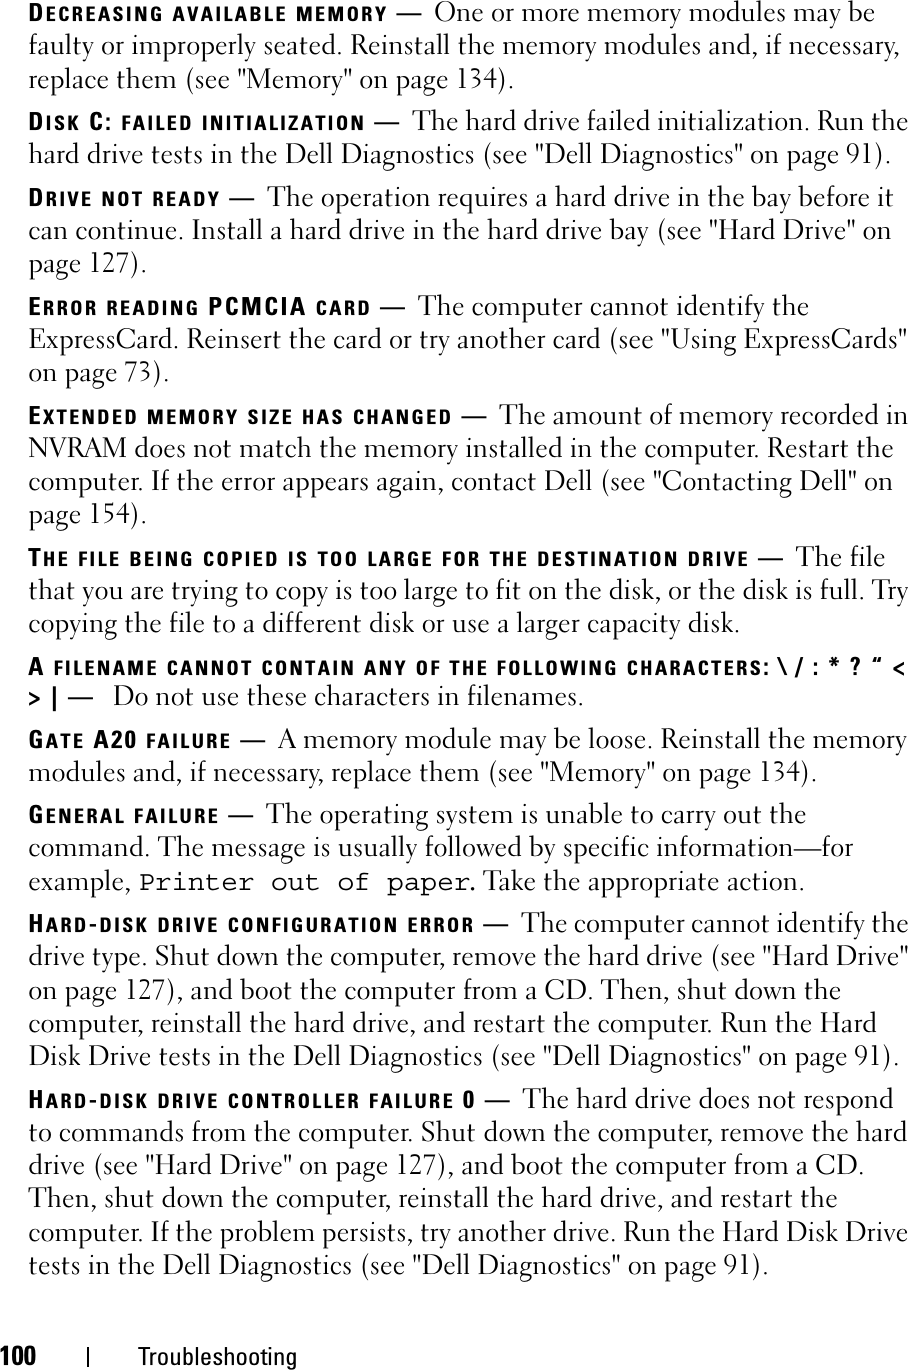 100 TroubleshootingDECREASING AVAILABLE MEMORY —One or more memory modules may be faulty or improperly seated. Reinstall the memory modules and, if necessary, replace them (see &quot;Memory&quot; on page 134).DISK C: FAILED INITIALIZATION —The hard drive failed initialization. Run the hard drive tests in the Dell Diagnostics (see &quot;Dell Diagnostics&quot; on page 91). DRIVE NOT READY —The operation requires a hard drive in the bay before it can continue. Install a hard drive in the hard drive bay (see &quot;Hard Drive&quot; on page 127). ERROR READING PCMCIA CARD —The computer cannot identify the ExpressCard. Reinsert the card or try another card (see &quot;Using ExpressCards&quot; on page 73). EXTENDED MEMORY SIZE HAS CHANGED —The amount of memory recorded in NVRAM does not match the memory installed in the computer. Restart the computer. If the error appears again, contact Dell (see &quot;Contacting Dell&quot; on page 154).THE FILE BEING COPIED IS TOO LARGE FOR THE DESTINATION DRIVE —The file that you are trying to copy is too large to fit on the disk, or the disk is full. Try copying the file to a different disk or use a larger capacity disk.AFILENAME CANNOT CONTAIN ANY OF THE FOLLOWING CHARACTERS: \ / : * ? “ &lt; &gt; | —  Do not use these characters in filenames.GATE A20 FAILURE —A memory module may be loose. Reinstall the memory modules and, if necessary, replace them (see &quot;Memory&quot; on page 134). GENERAL FAILURE —The operating system is unable to carry out the command. The message is usually followed by specific information—for example, Printer out of paper. Take the appropriate action.HARD-DISK DRIVE CONFIGURATION ERROR —The computer cannot identify the drive type. Shut down the computer, remove the hard drive (see &quot;Hard Drive&quot; on page 127), and boot the computer from a CD. Then, shut down the computer, reinstall the hard drive, and restart the computer. Run the Hard Disk Drive tests in the Dell Diagnostics (see &quot;Dell Diagnostics&quot; on page 91).HARD-DISK DRIVE CONTROLLER FAILURE 0—The hard drive does not respond to commands from the computer. Shut down the computer, remove the hard drive (see &quot;Hard Drive&quot; on page 127), and boot the computer from a CD. Then, shut down the computer, reinstall the hard drive, and restart the computer. If the problem persists, try another drive. Run the Hard Disk Drive tests in the Dell Diagnostics (see &quot;Dell Diagnostics&quot; on page 91).